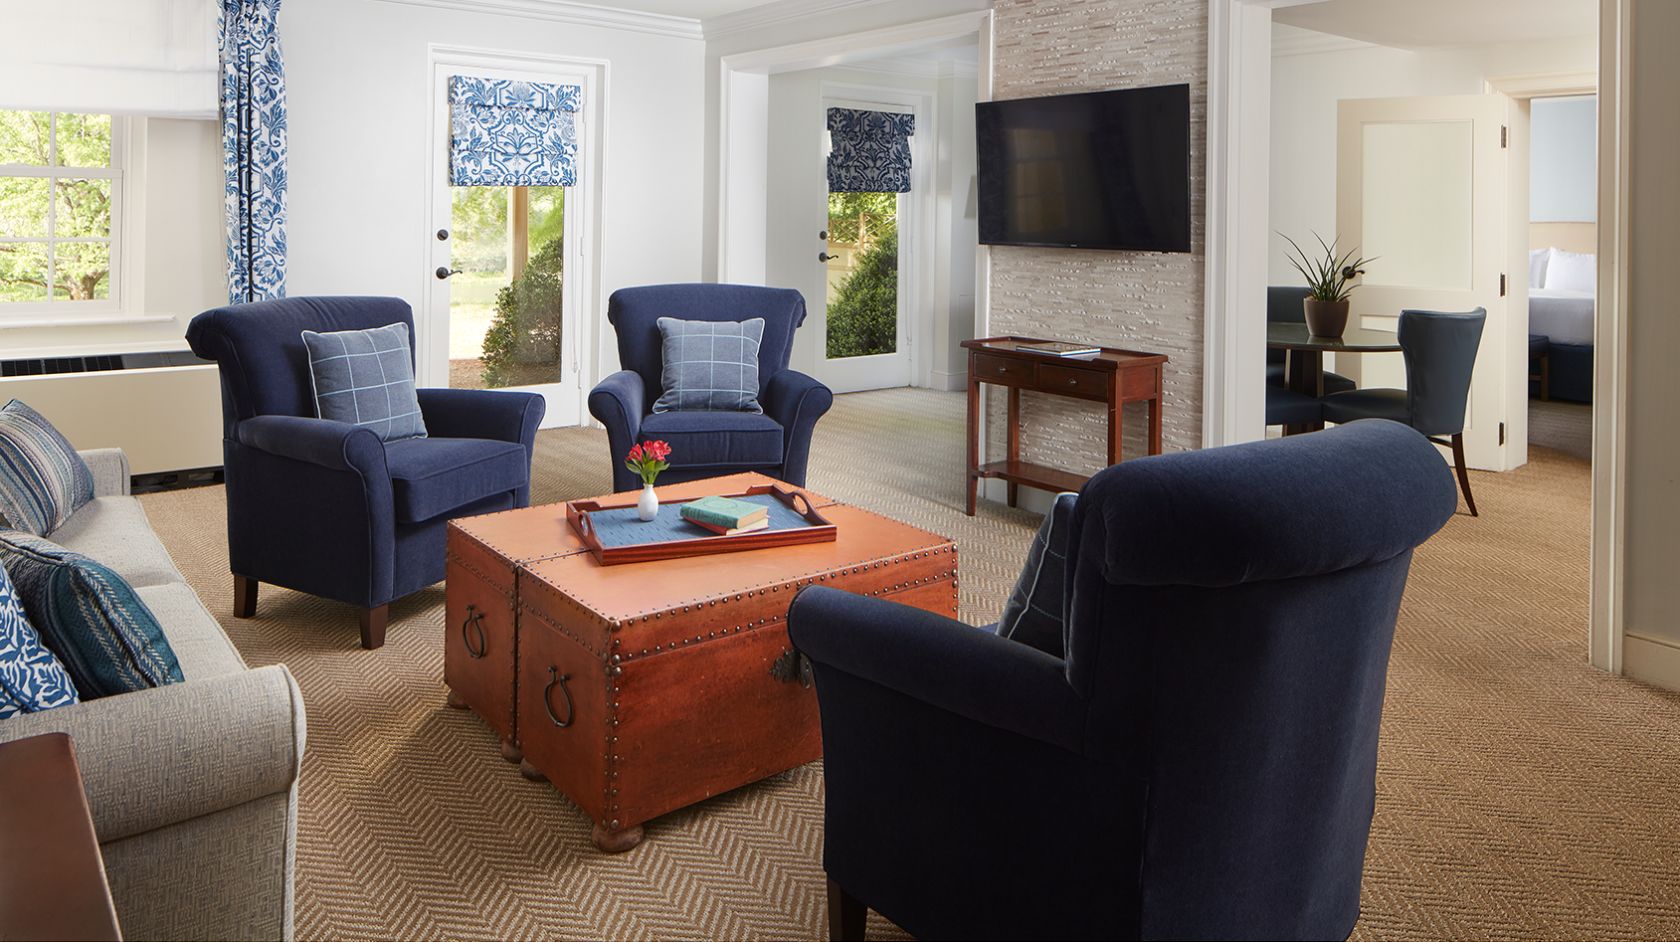 A Living Room With Blue Chairs